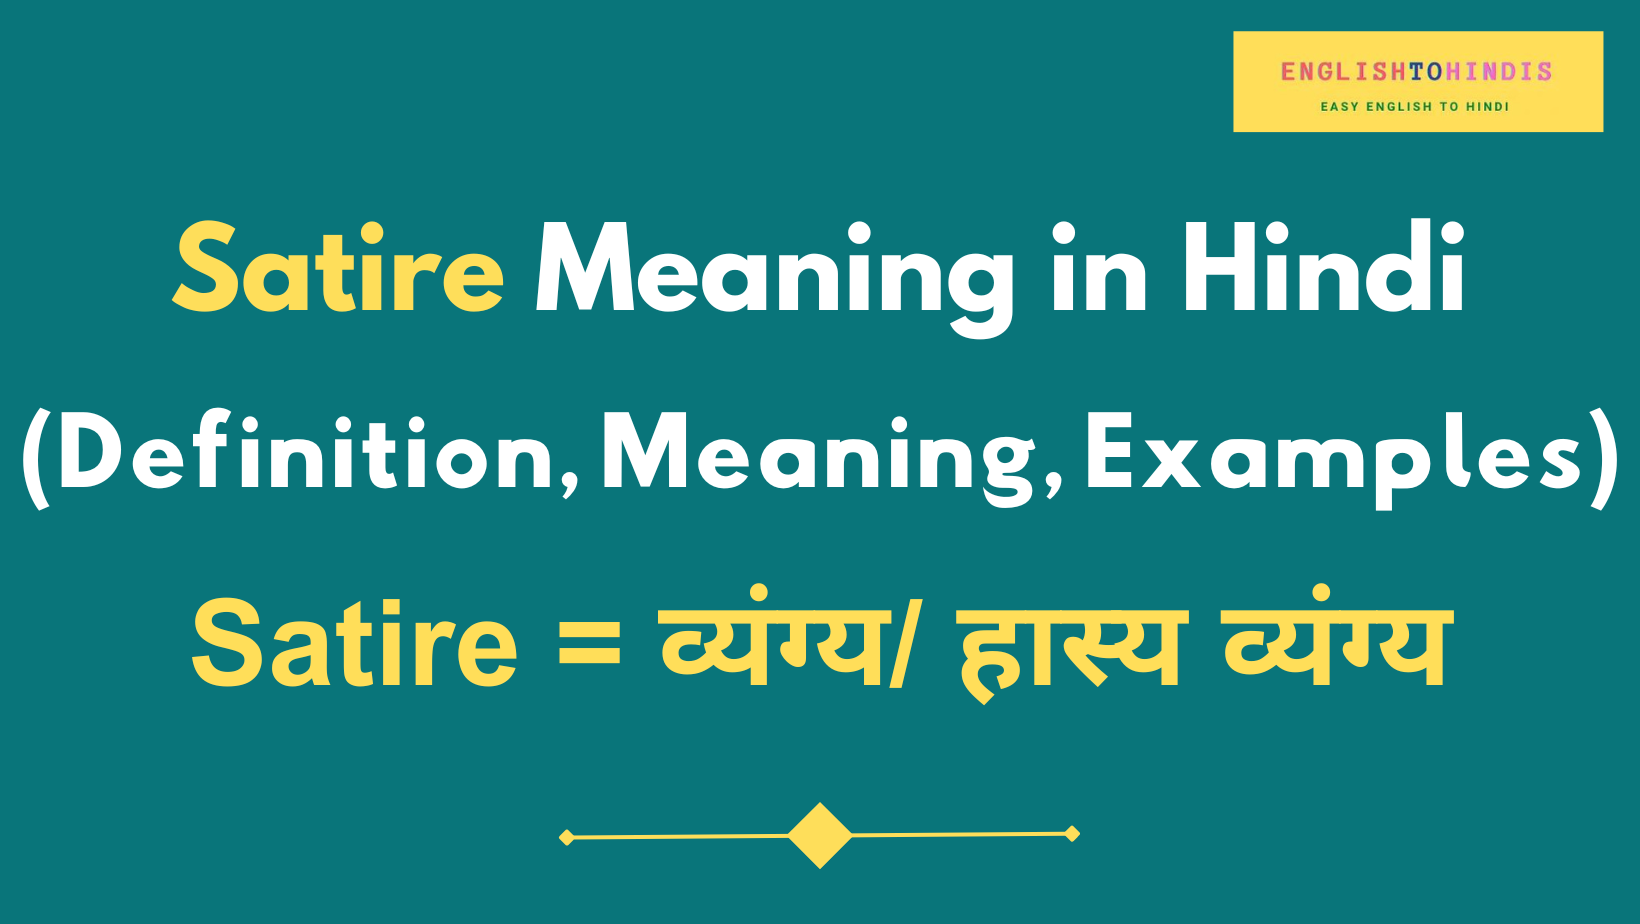 Satire Meaning in Hindi